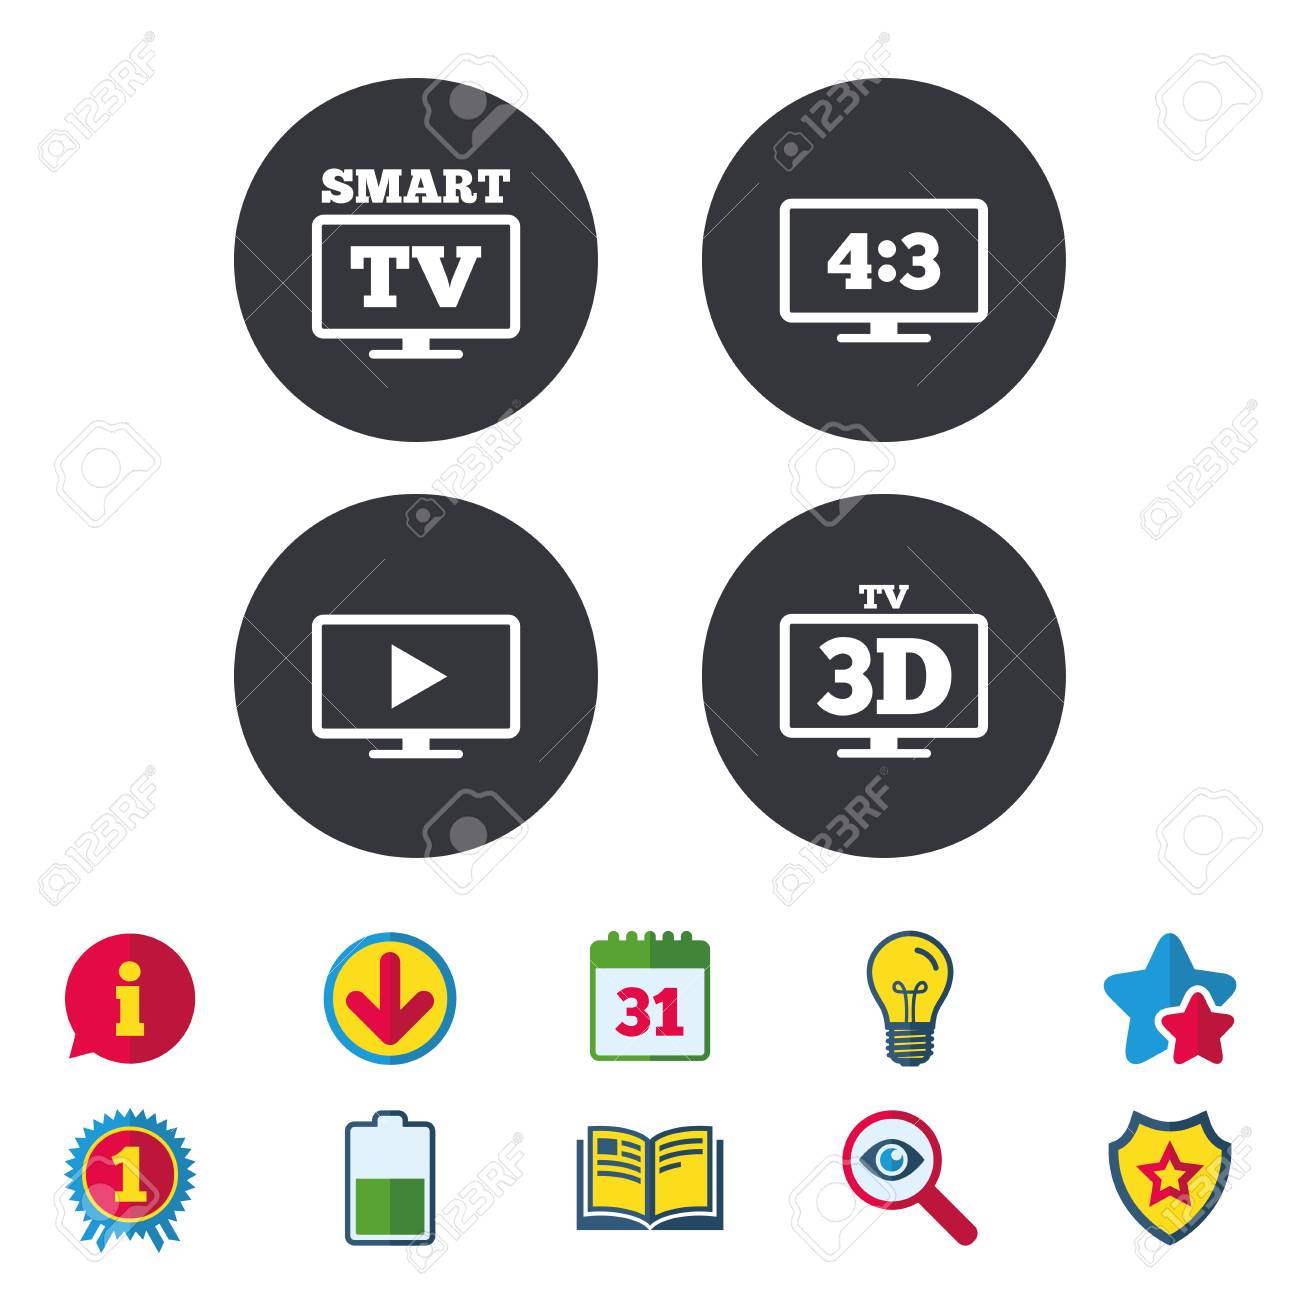 Clipart of Aspect ratio 4:3 widescreen tv sign icon. LCD Monitor 